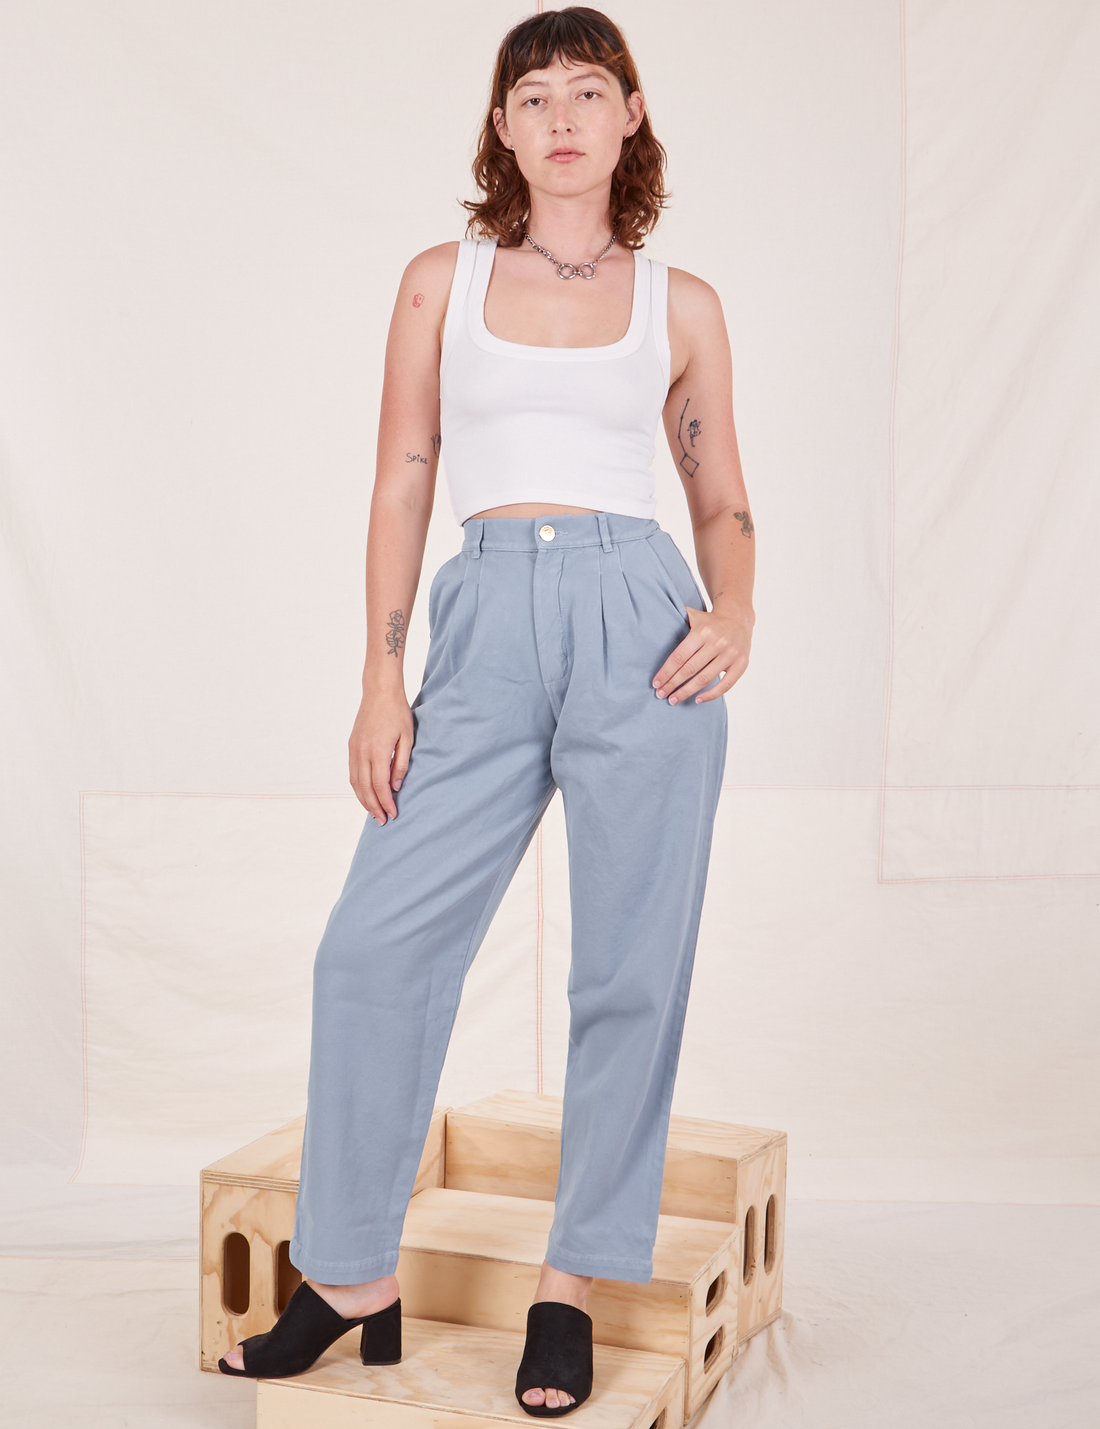 Alex is wearing Organic Trousers in Periwinkle and vintage off-white Cropped Tank Top